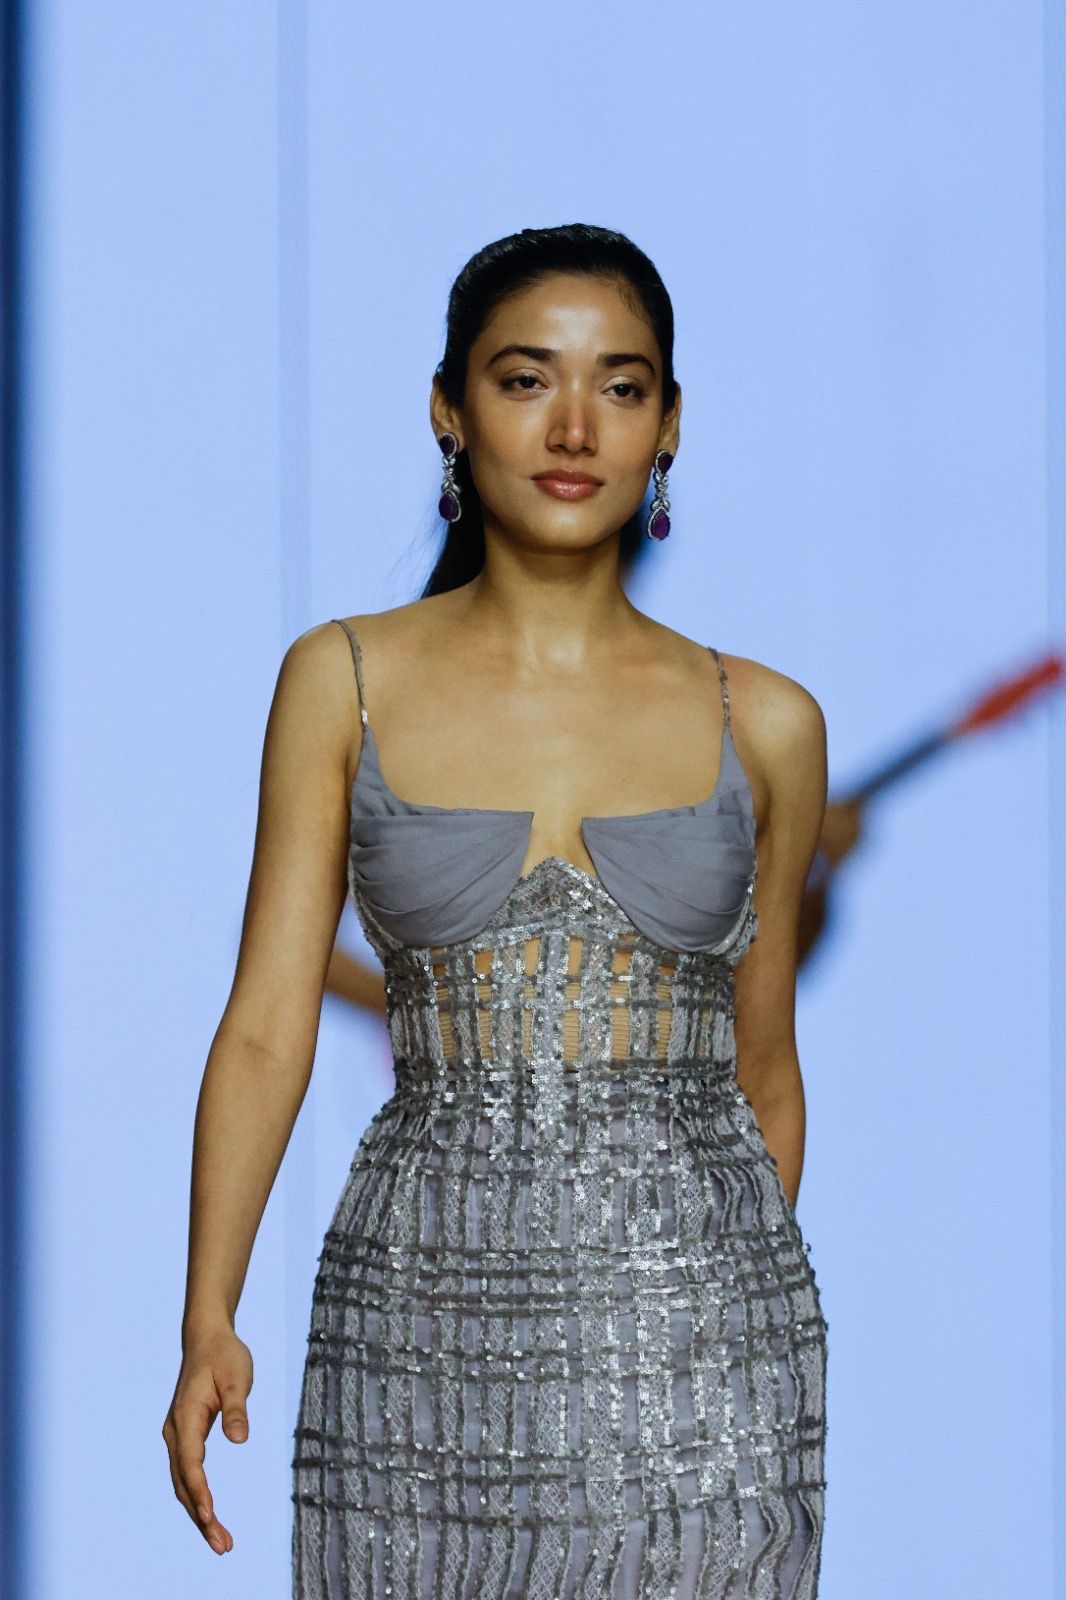 DHRUV KAPOOR - DESTROYED DENIM CORSET DRESS  HBX - Globally Curated  Fashion and Lifestyle by Hypebeast